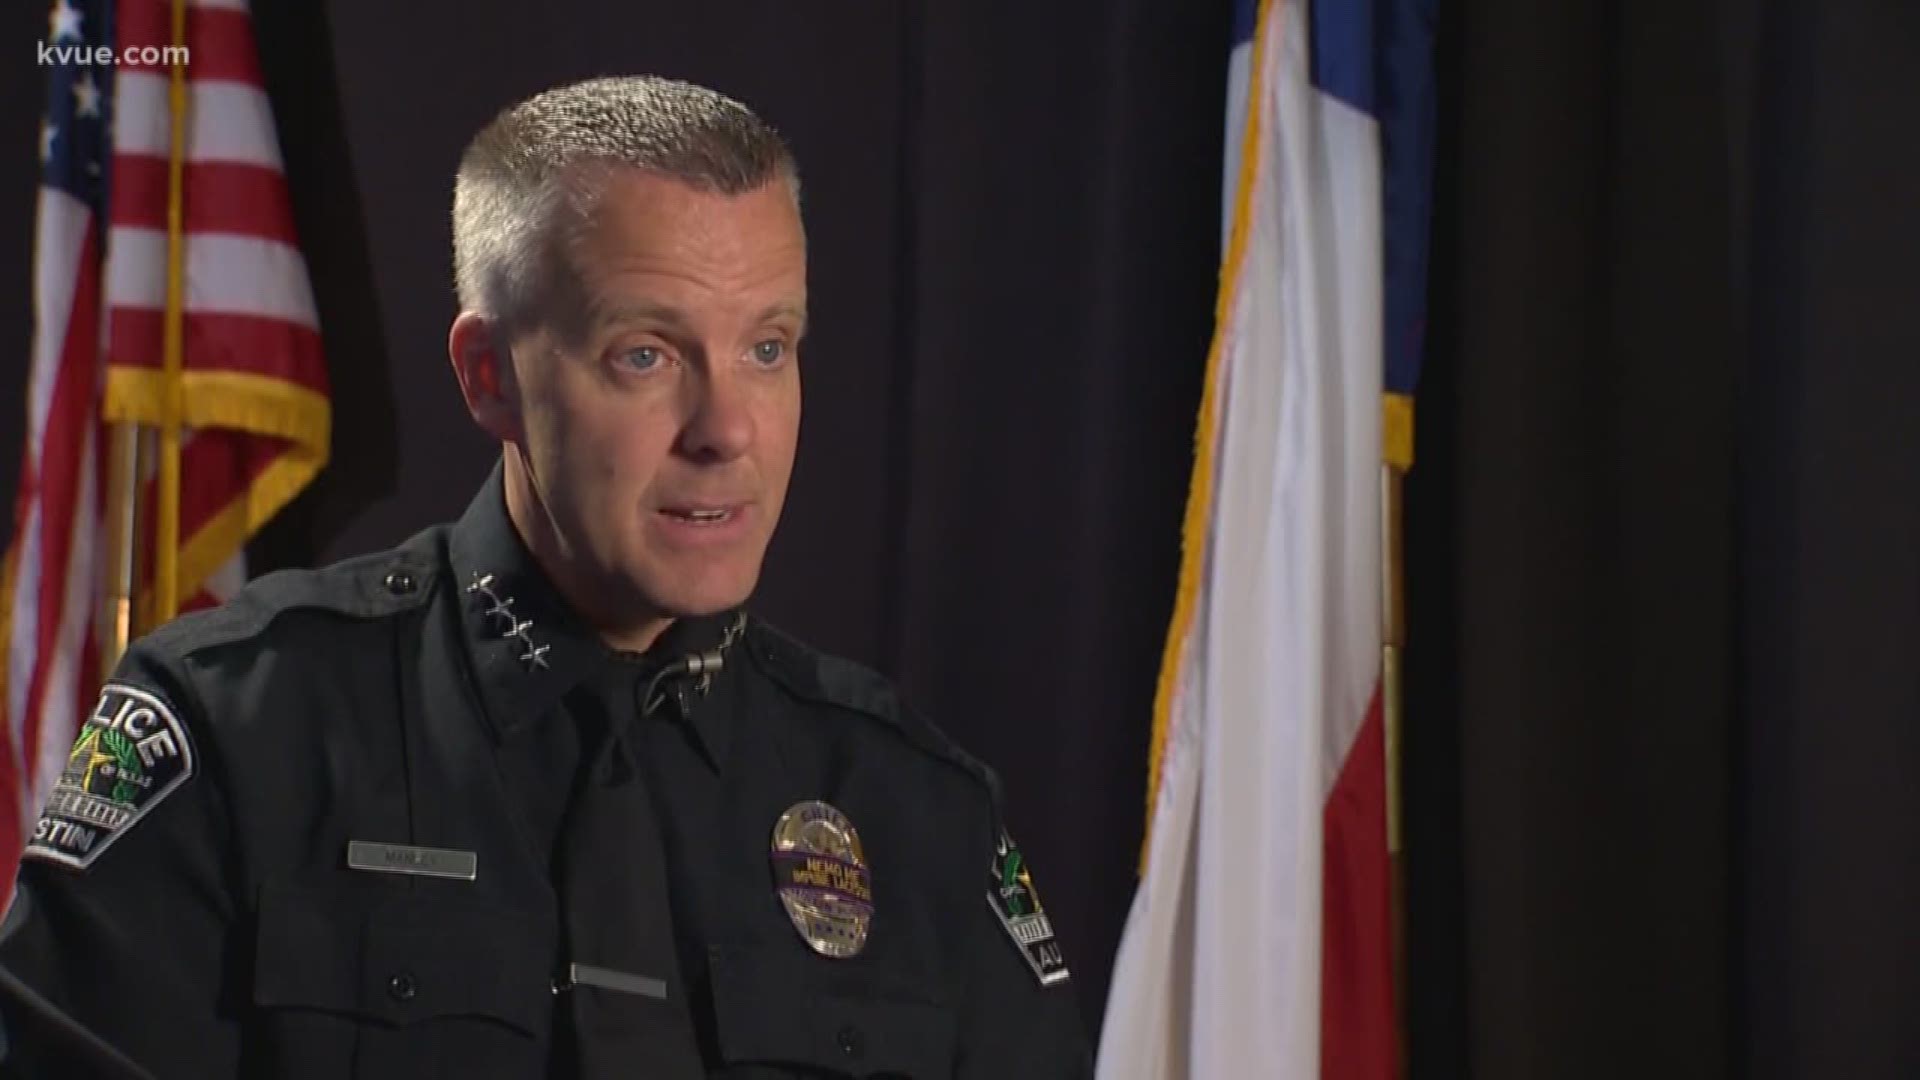 Manley to be sworn in as Austin police chief